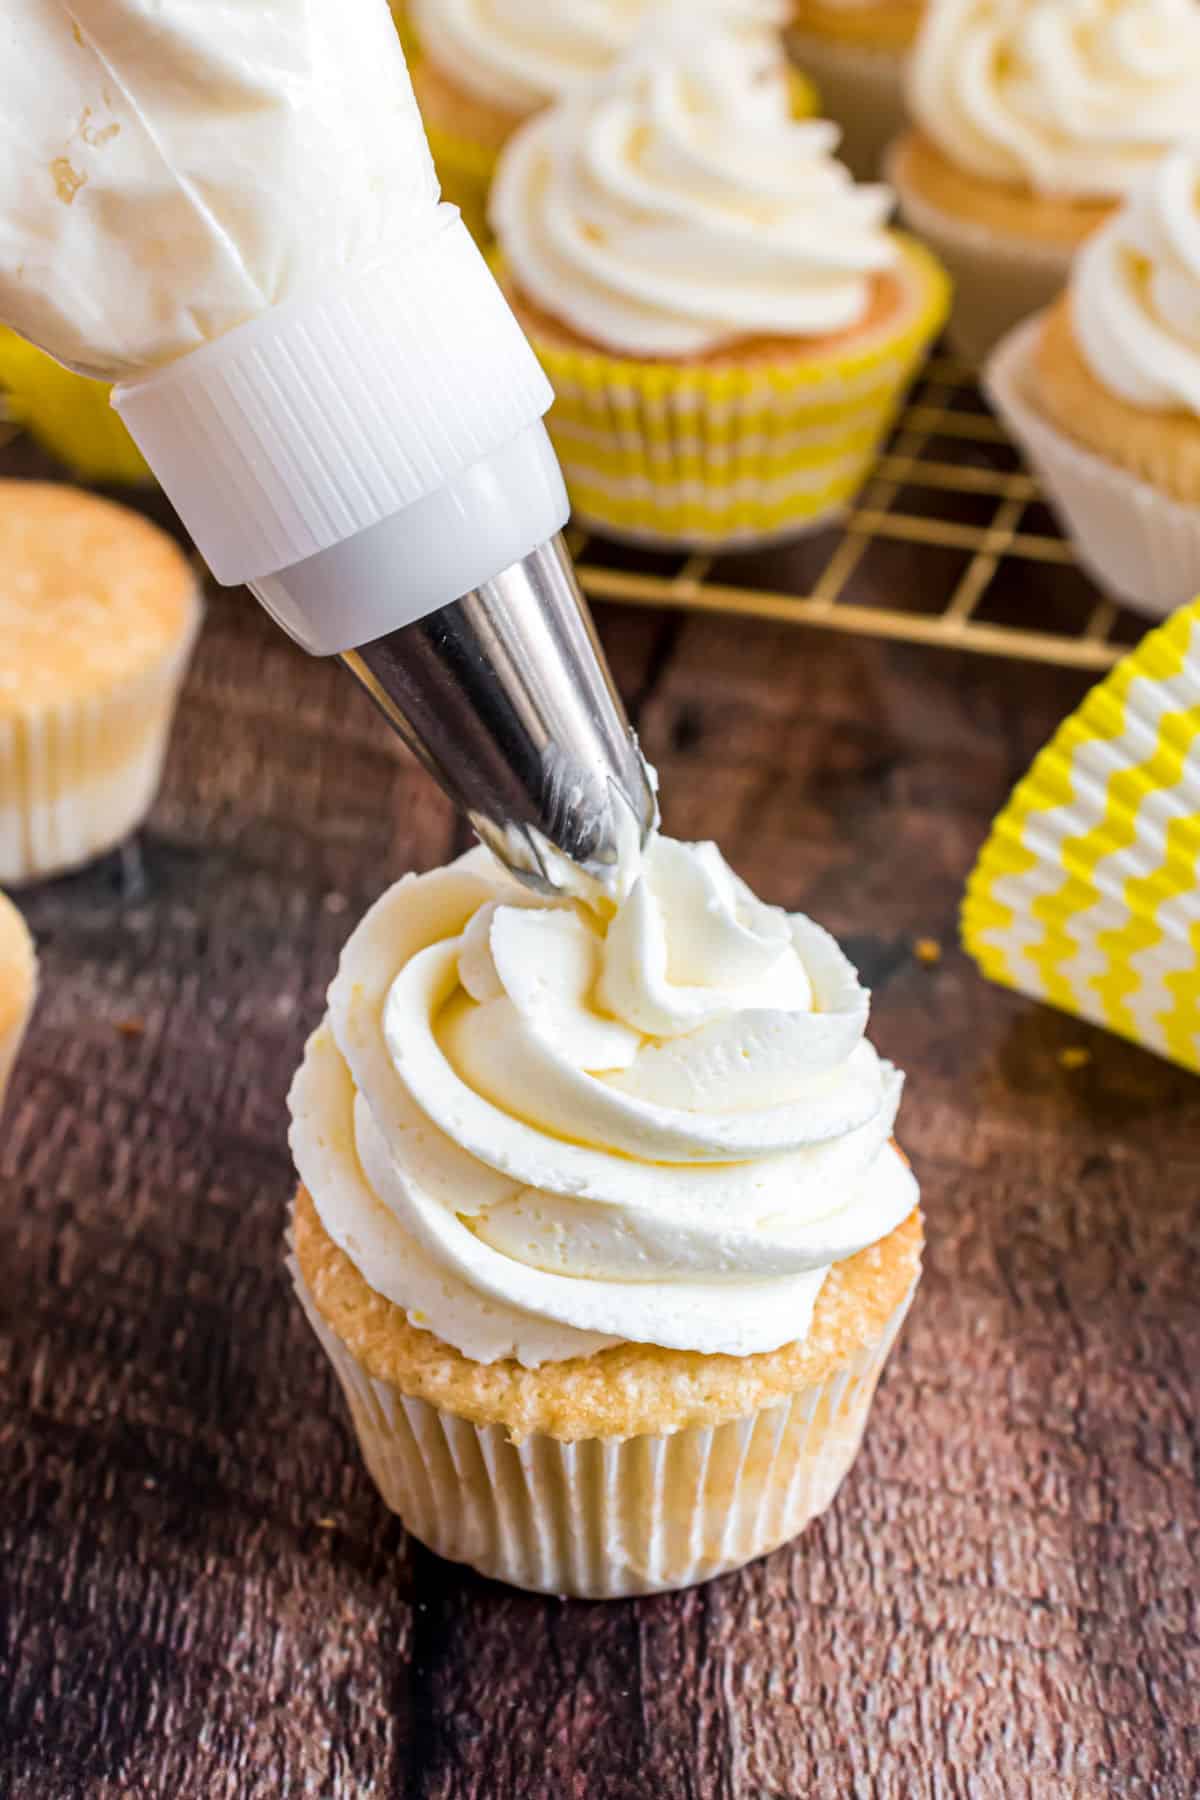 Frosting being piped onto a lemon cupcake.